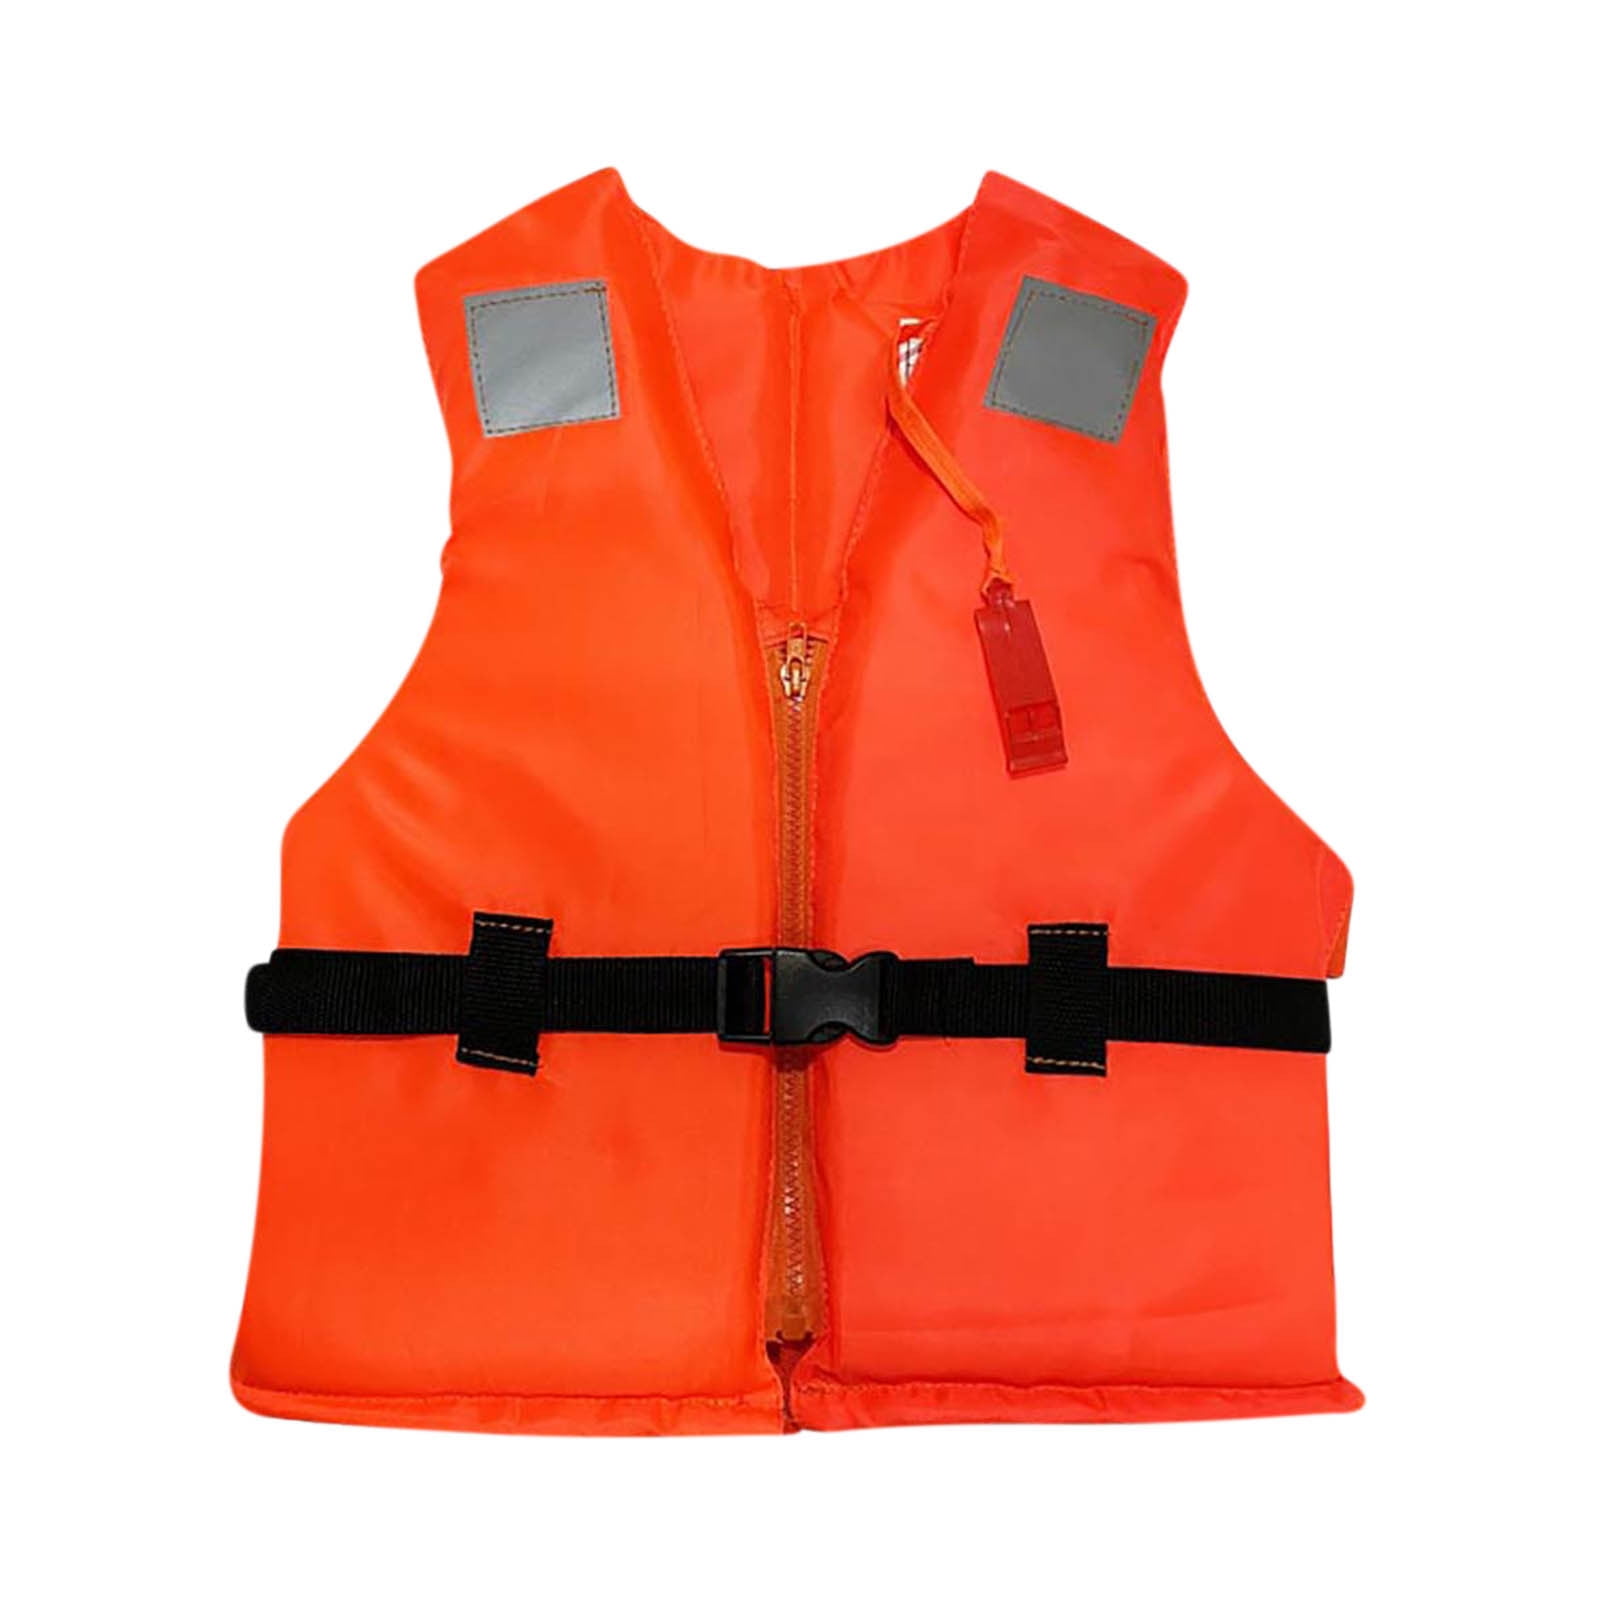 Cglfd Life Jackets For Kids Child General Purpose Life Jacket 65 Pounds ...